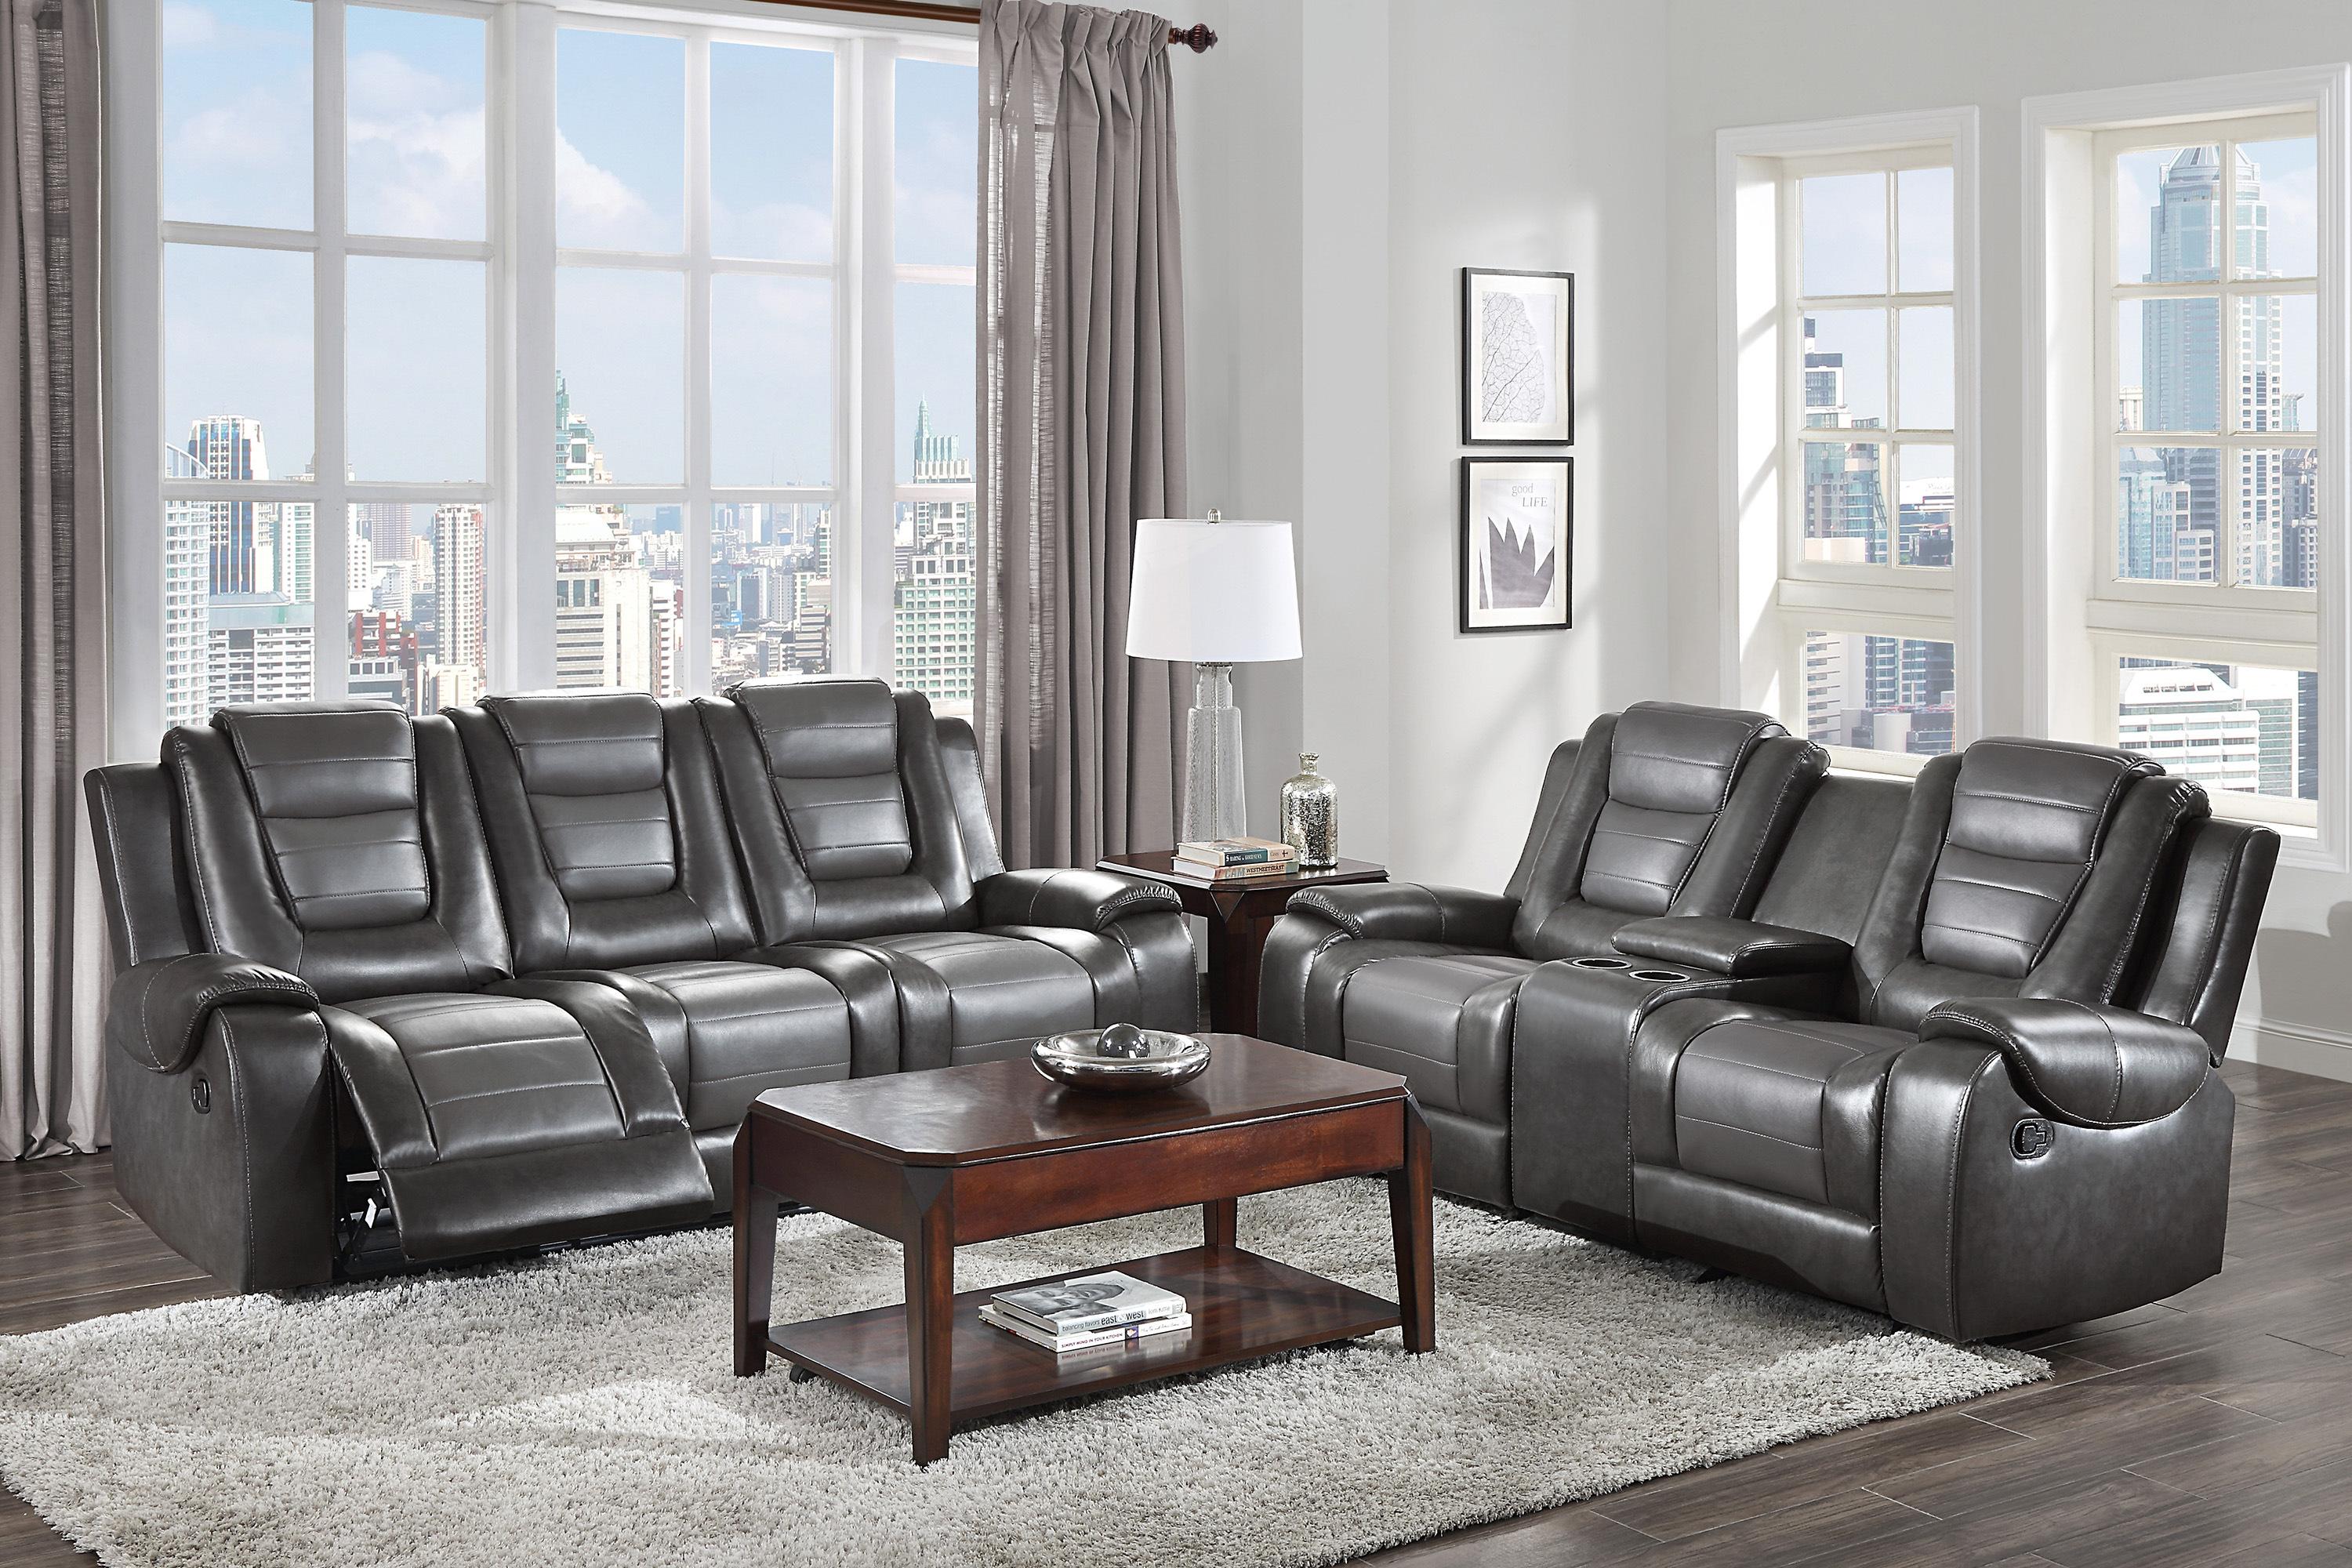 Transitional Reclining Set 9470GY-2PC Briscoe 9470GY-2PC in Light Gray, Dark Gray Faux Leather